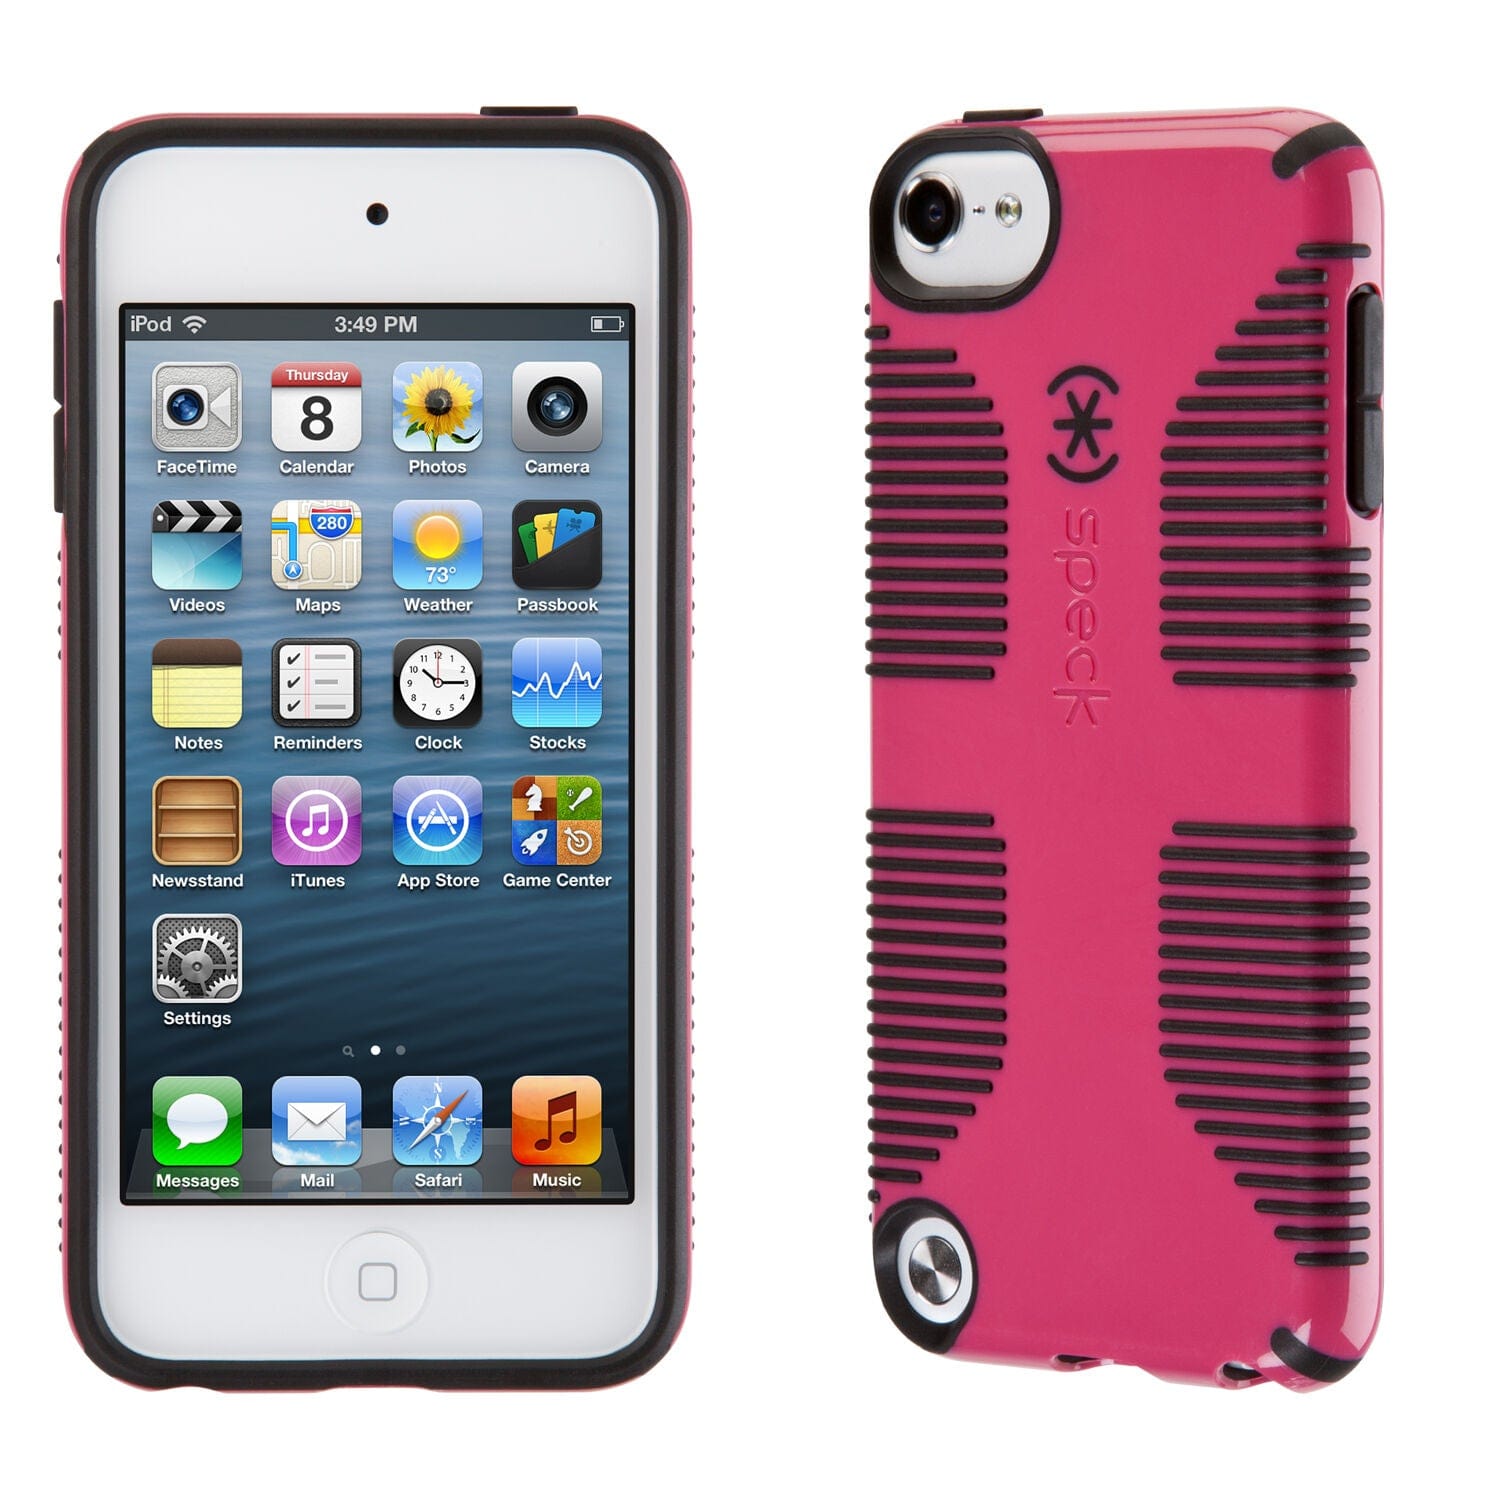 Speck CandyShell iPod Touch 6G & 5G Cases Best iPod Touch 6G & 5G - $29.95